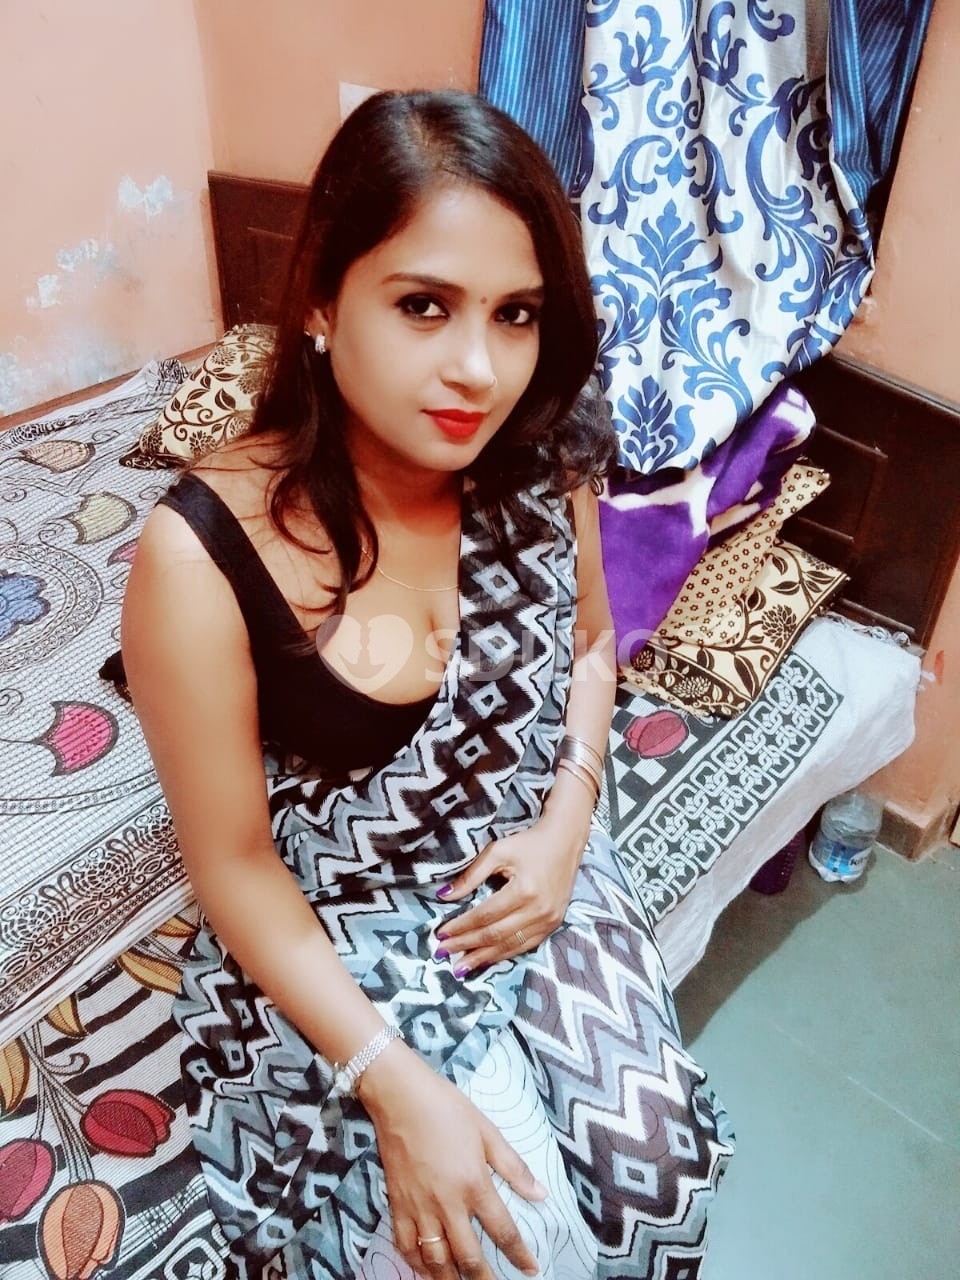 9257-68-3709__ AMBATTUR MY SELF ABHILASHA UNLIMITED SEX CUTE BEST SERVICE AND SAFE AND SECURE AND 24 HR AVAILABLE